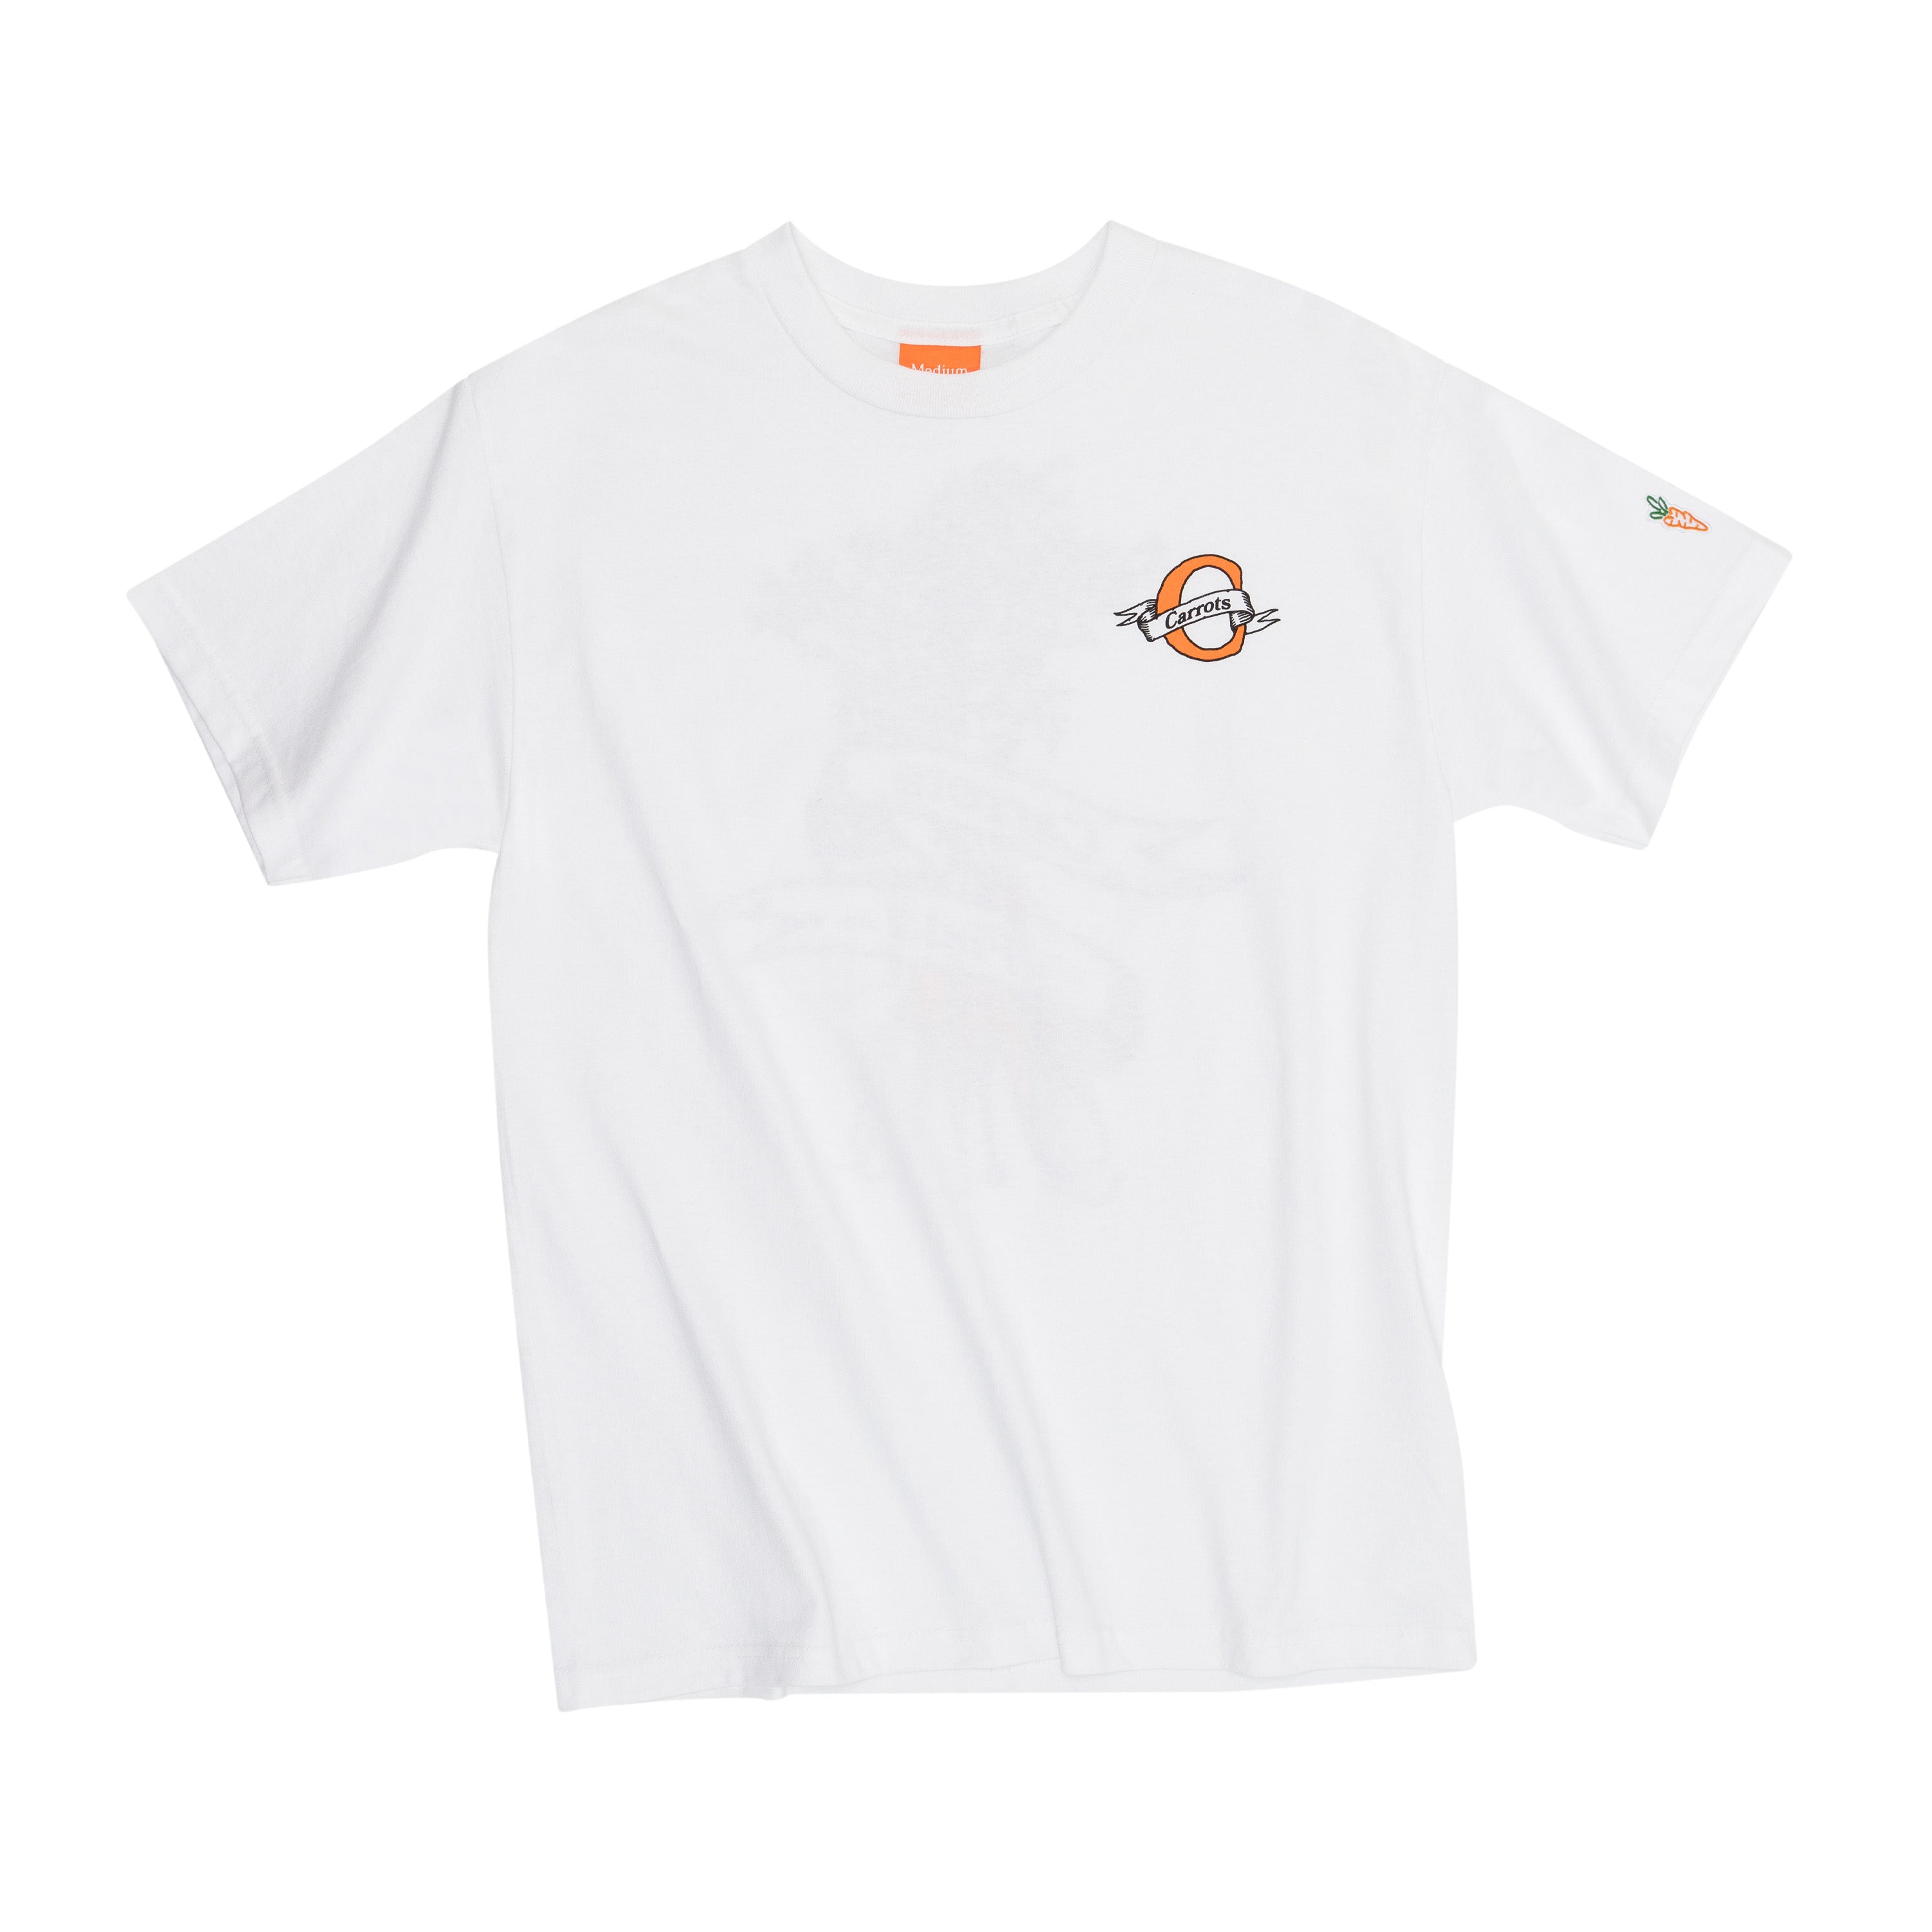 BANNER TEE - WHITE | HOLIDAY QS 23' | Carrots by Anwar Carrots – Carrots By  Anwar Carrots